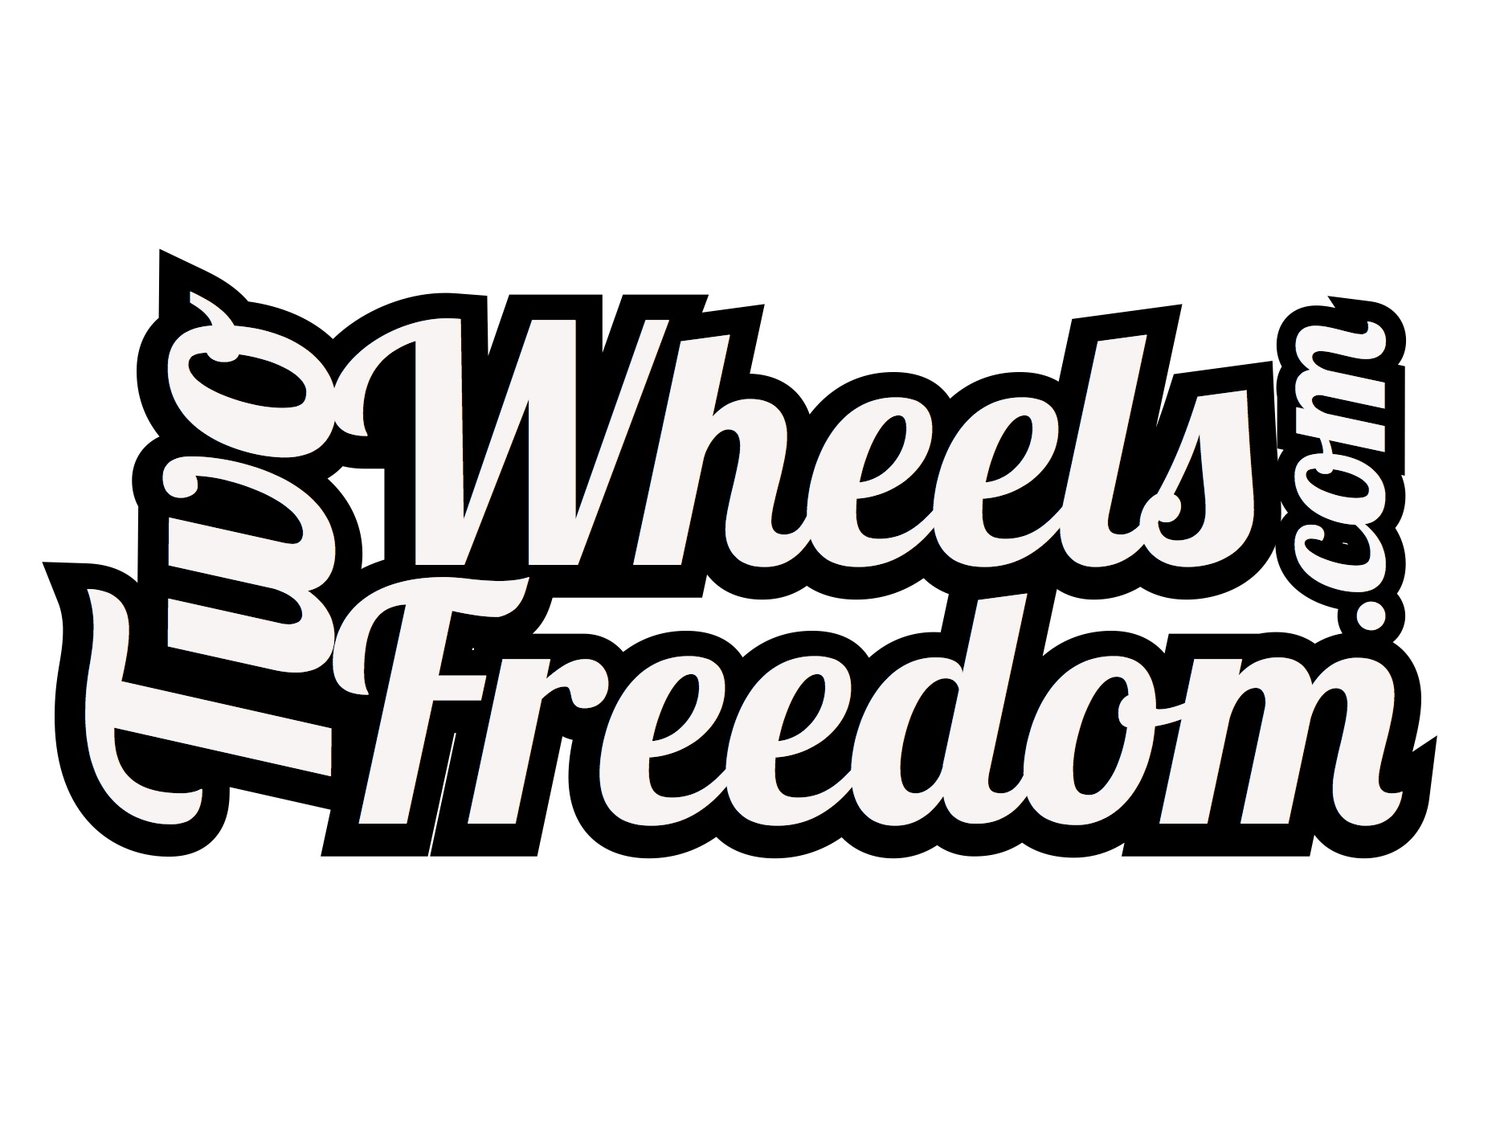 Two Wheels to Freedom